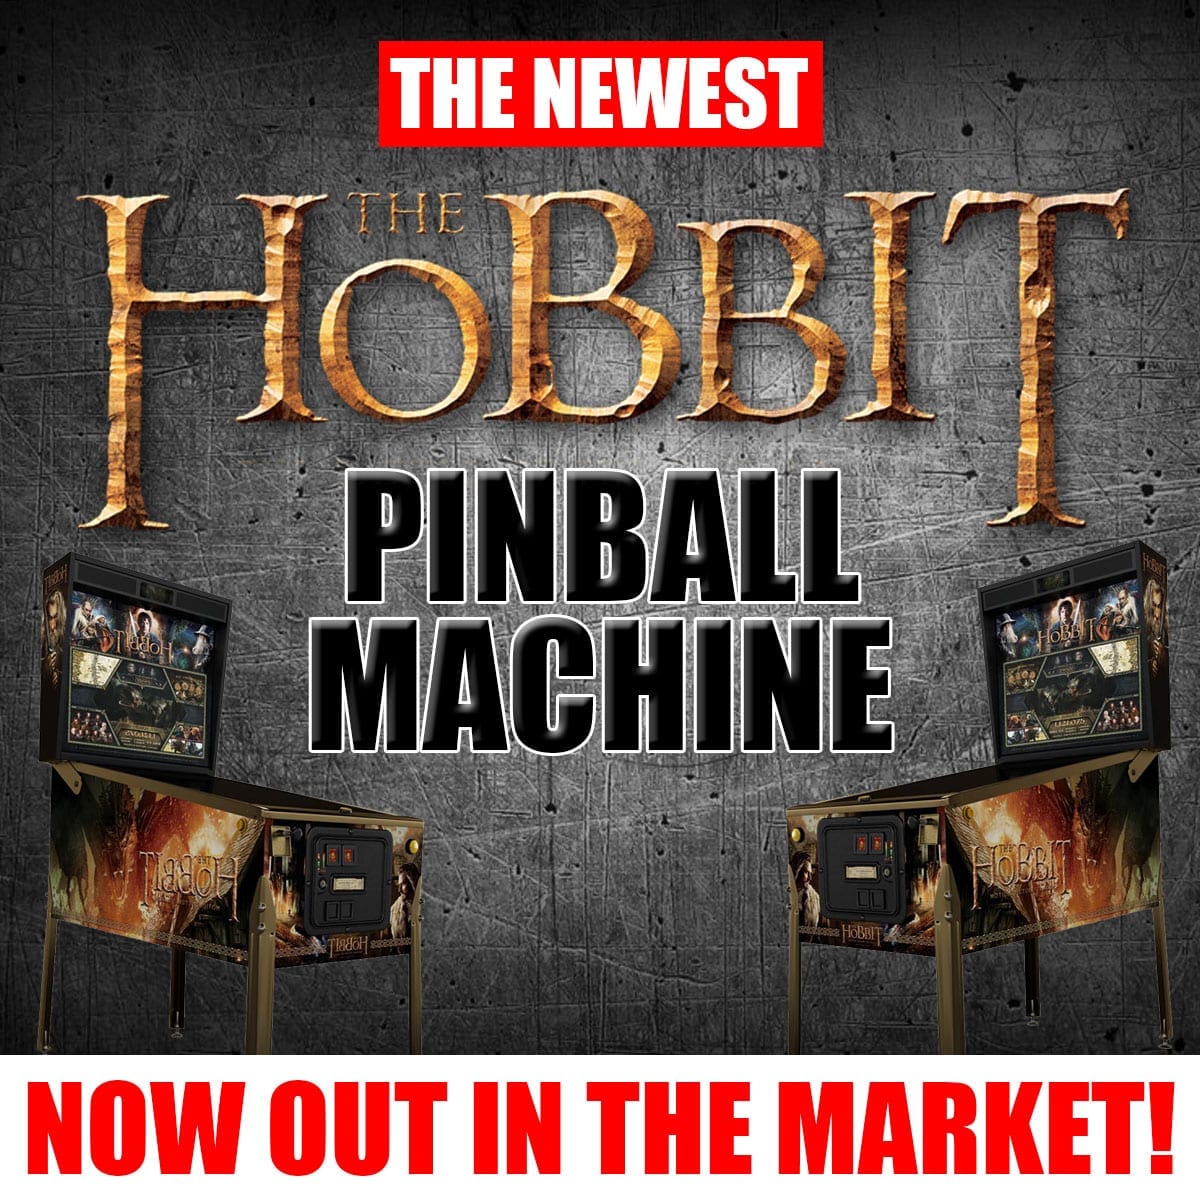 The Newest The Hobbit Pinball Machine now out in the Market!